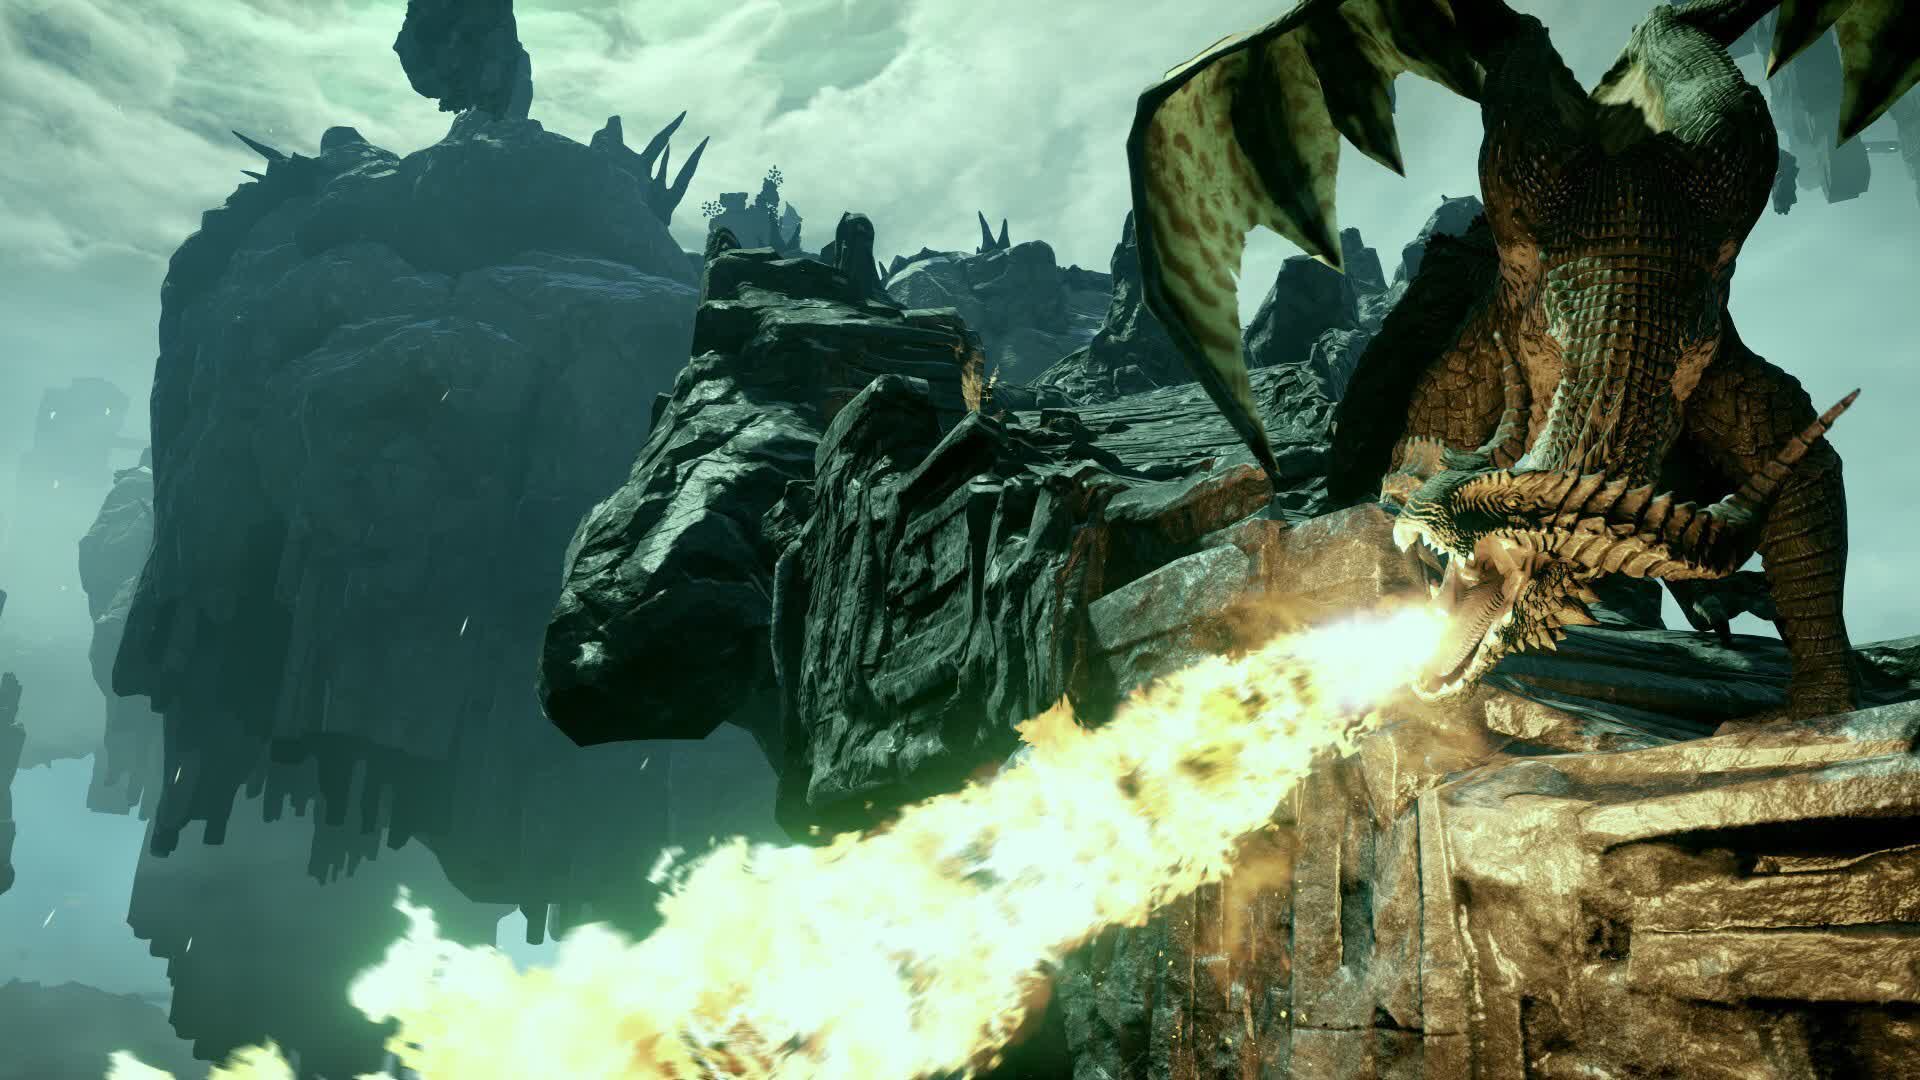 Dragon Age Inquisition is free for a week as part of Epic's Mega Sale